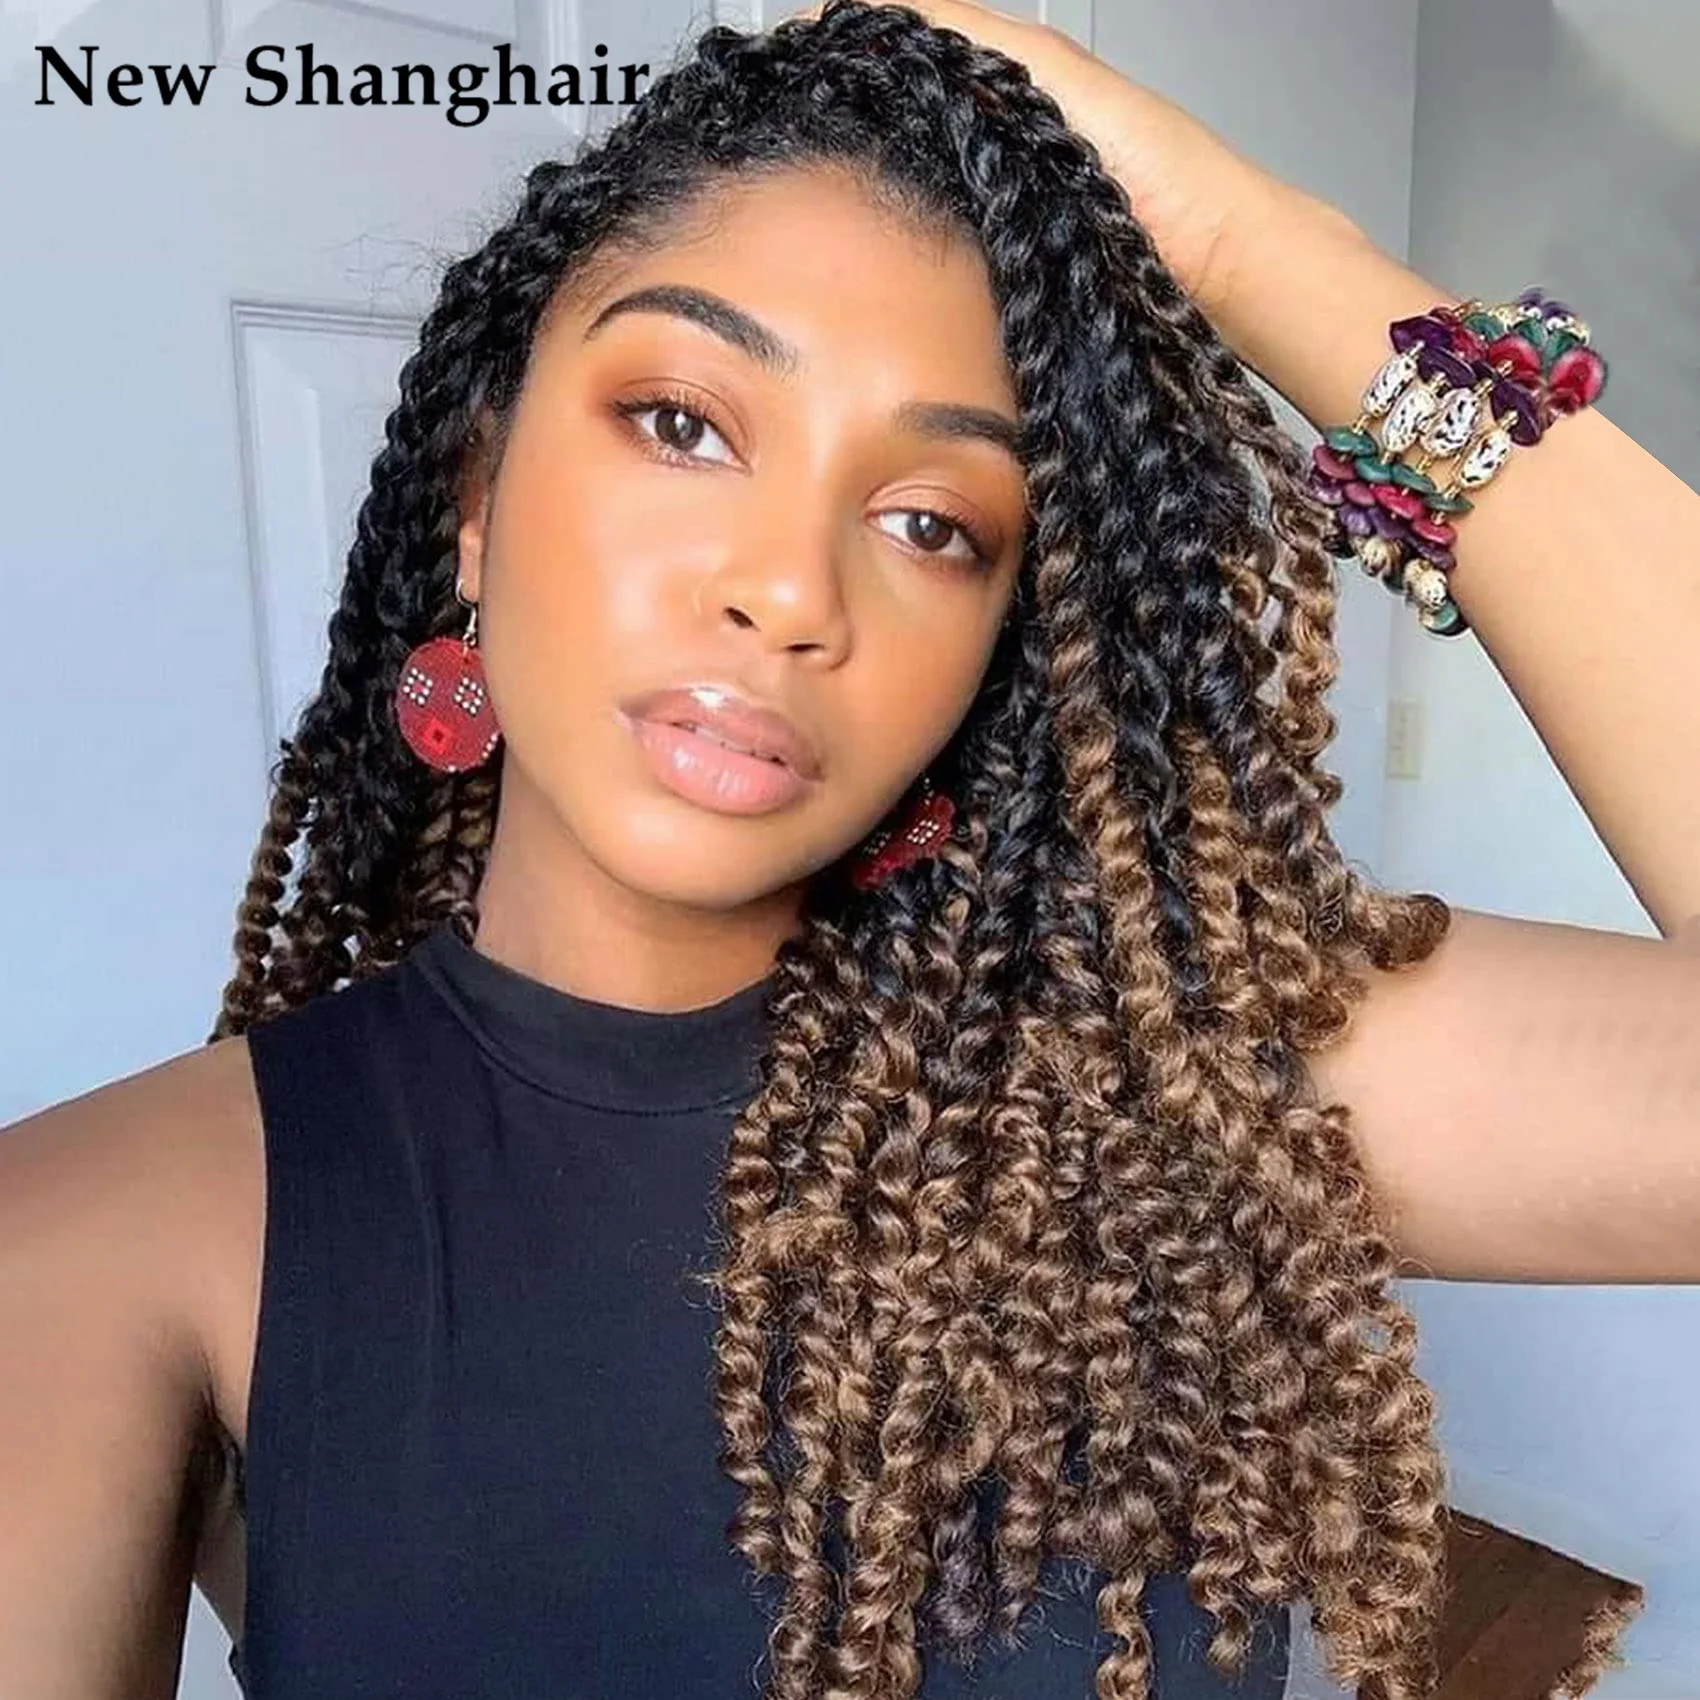 24 Inch Passion Twist Crochet Hair for Black Women Pretwisted Curly Hair Spring Twists Synthetic Braiding Hair Extensions LS01 women s belt black pu leather gold fried dough twists buckle belt punk style jeans with student belt with suit waist seal